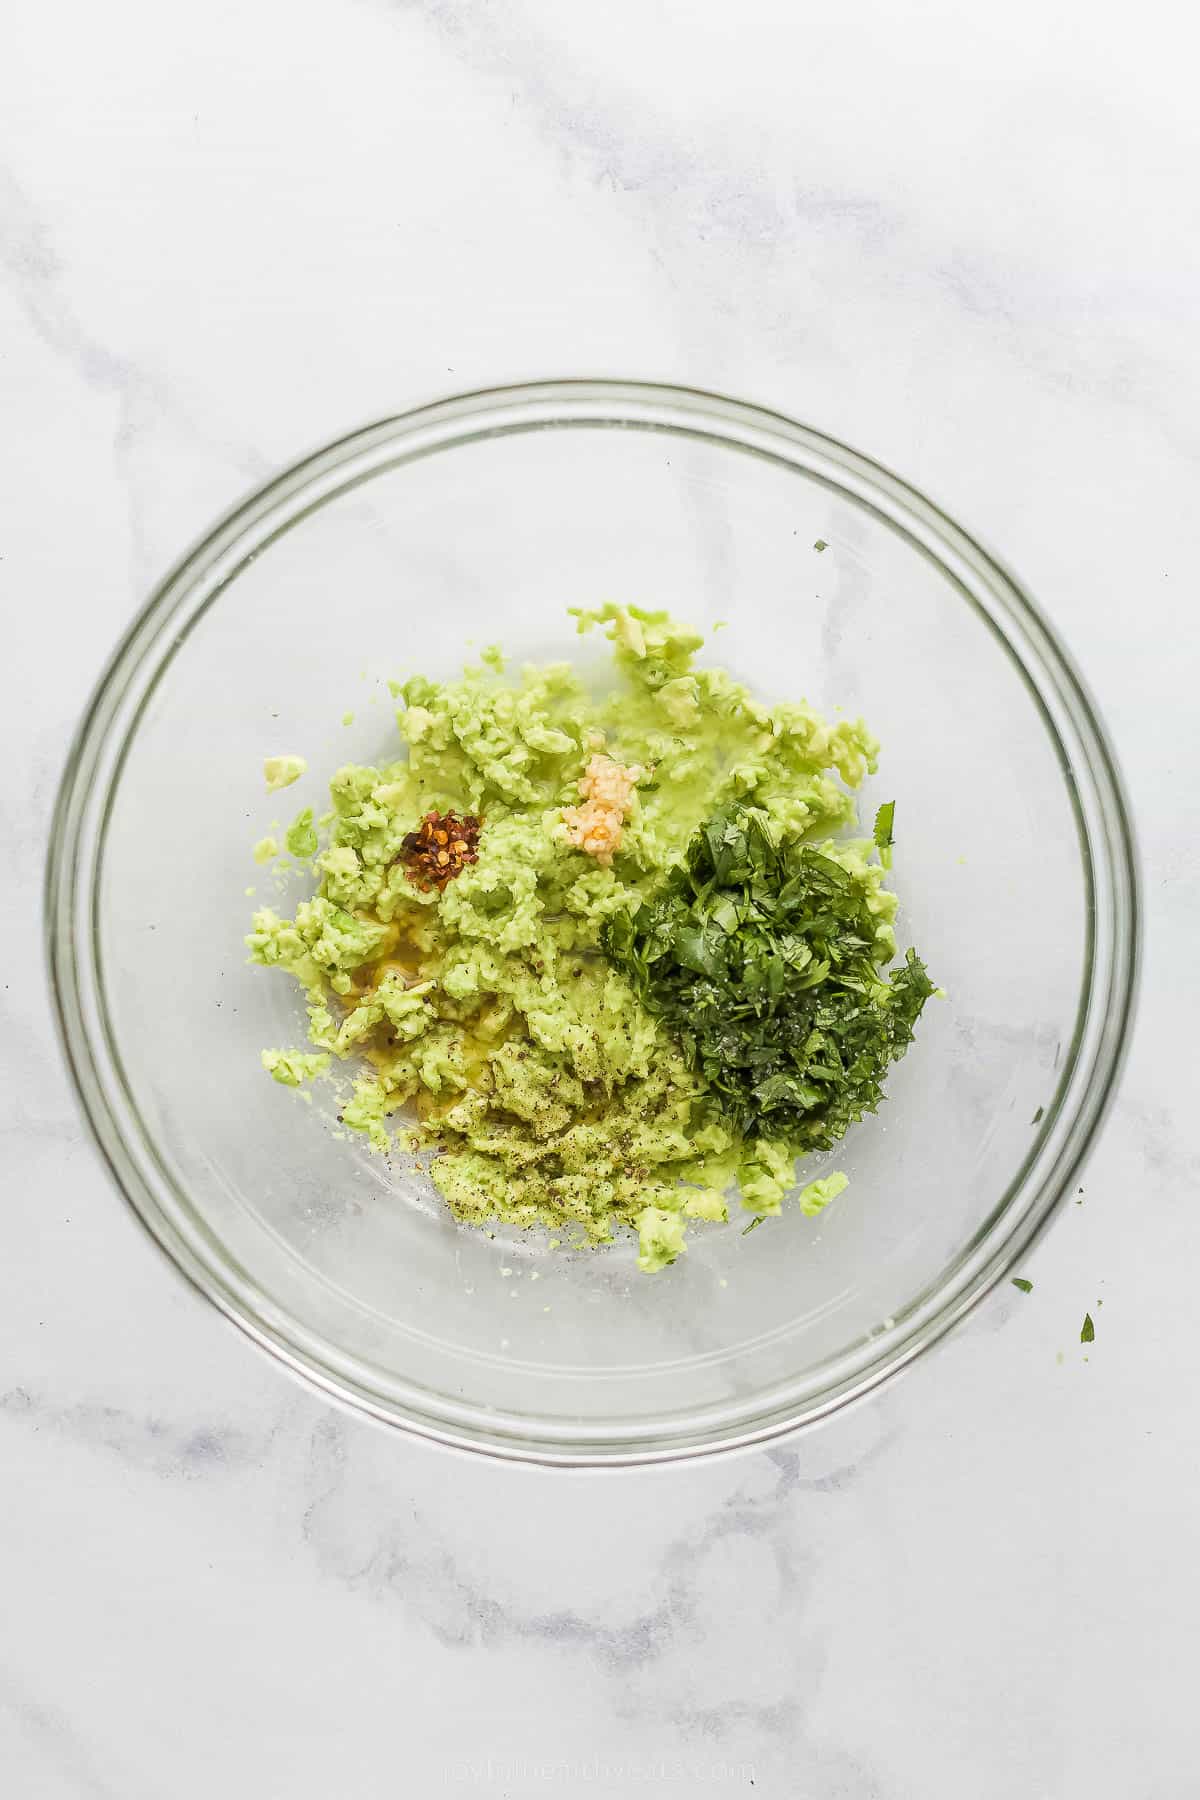 mixing ingredients into smashed avocado in a bowl